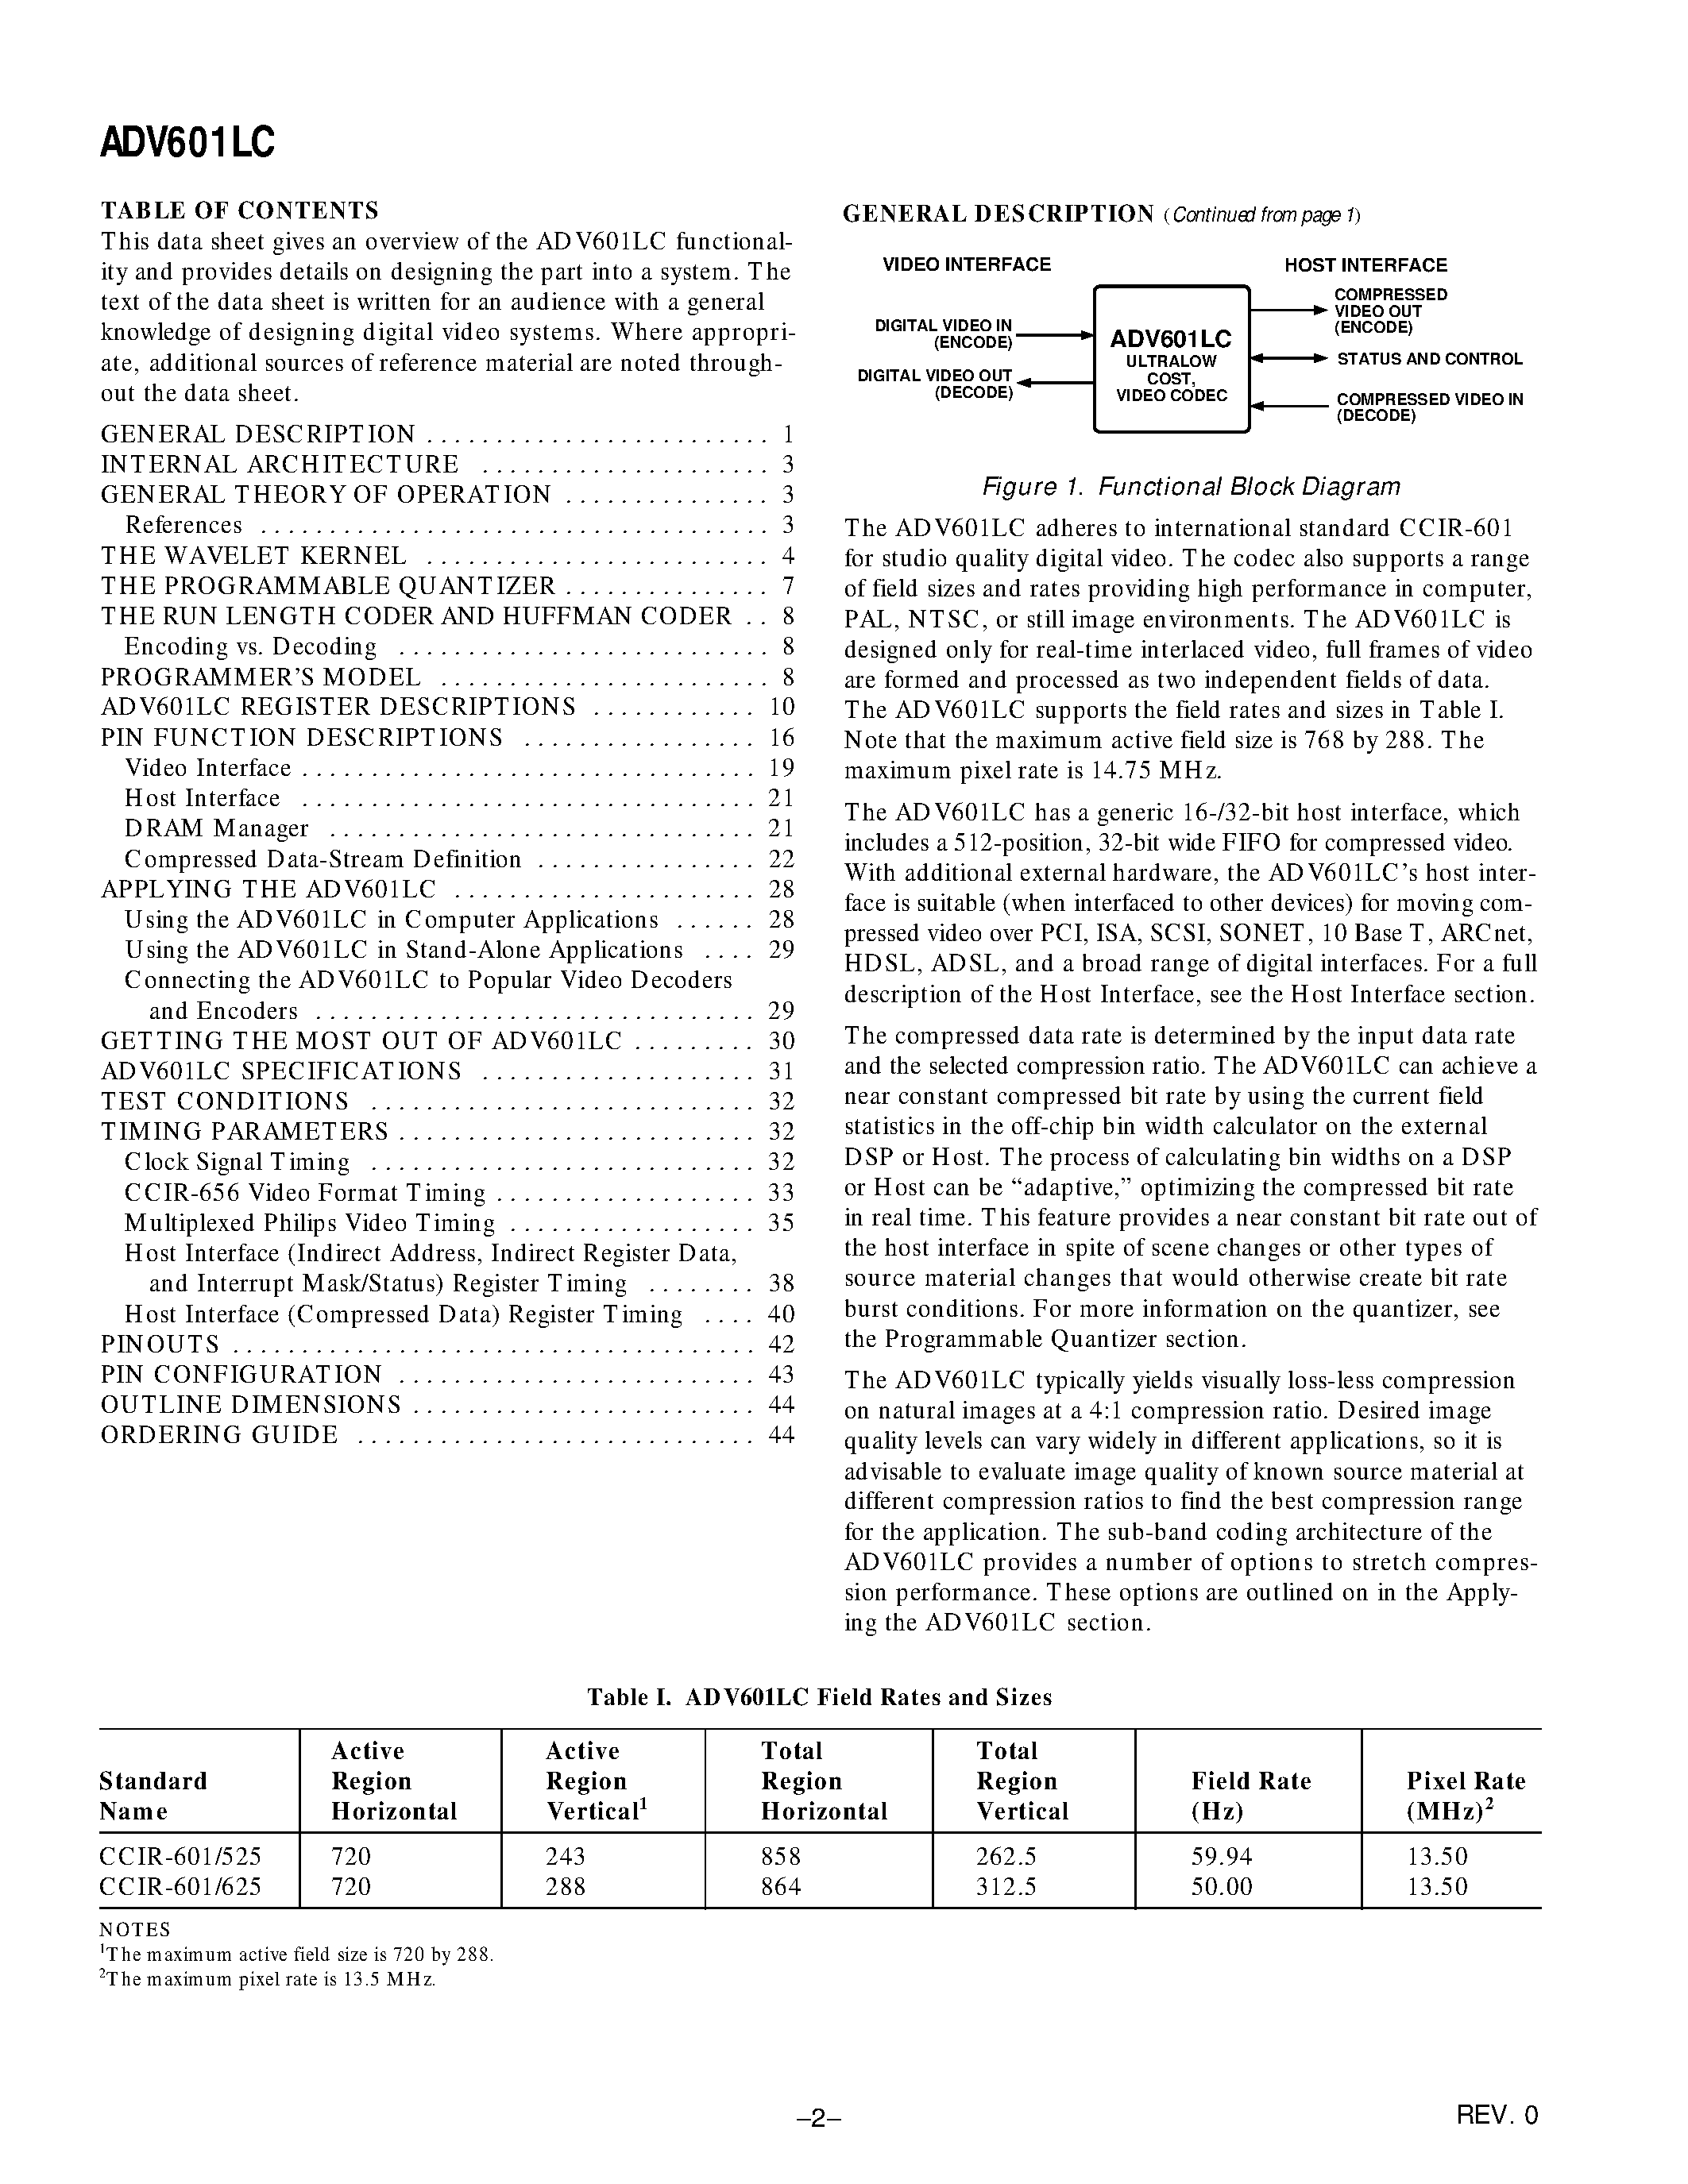 Datasheet ADV601LCJST - Ultralow Cost Video Codec page 2